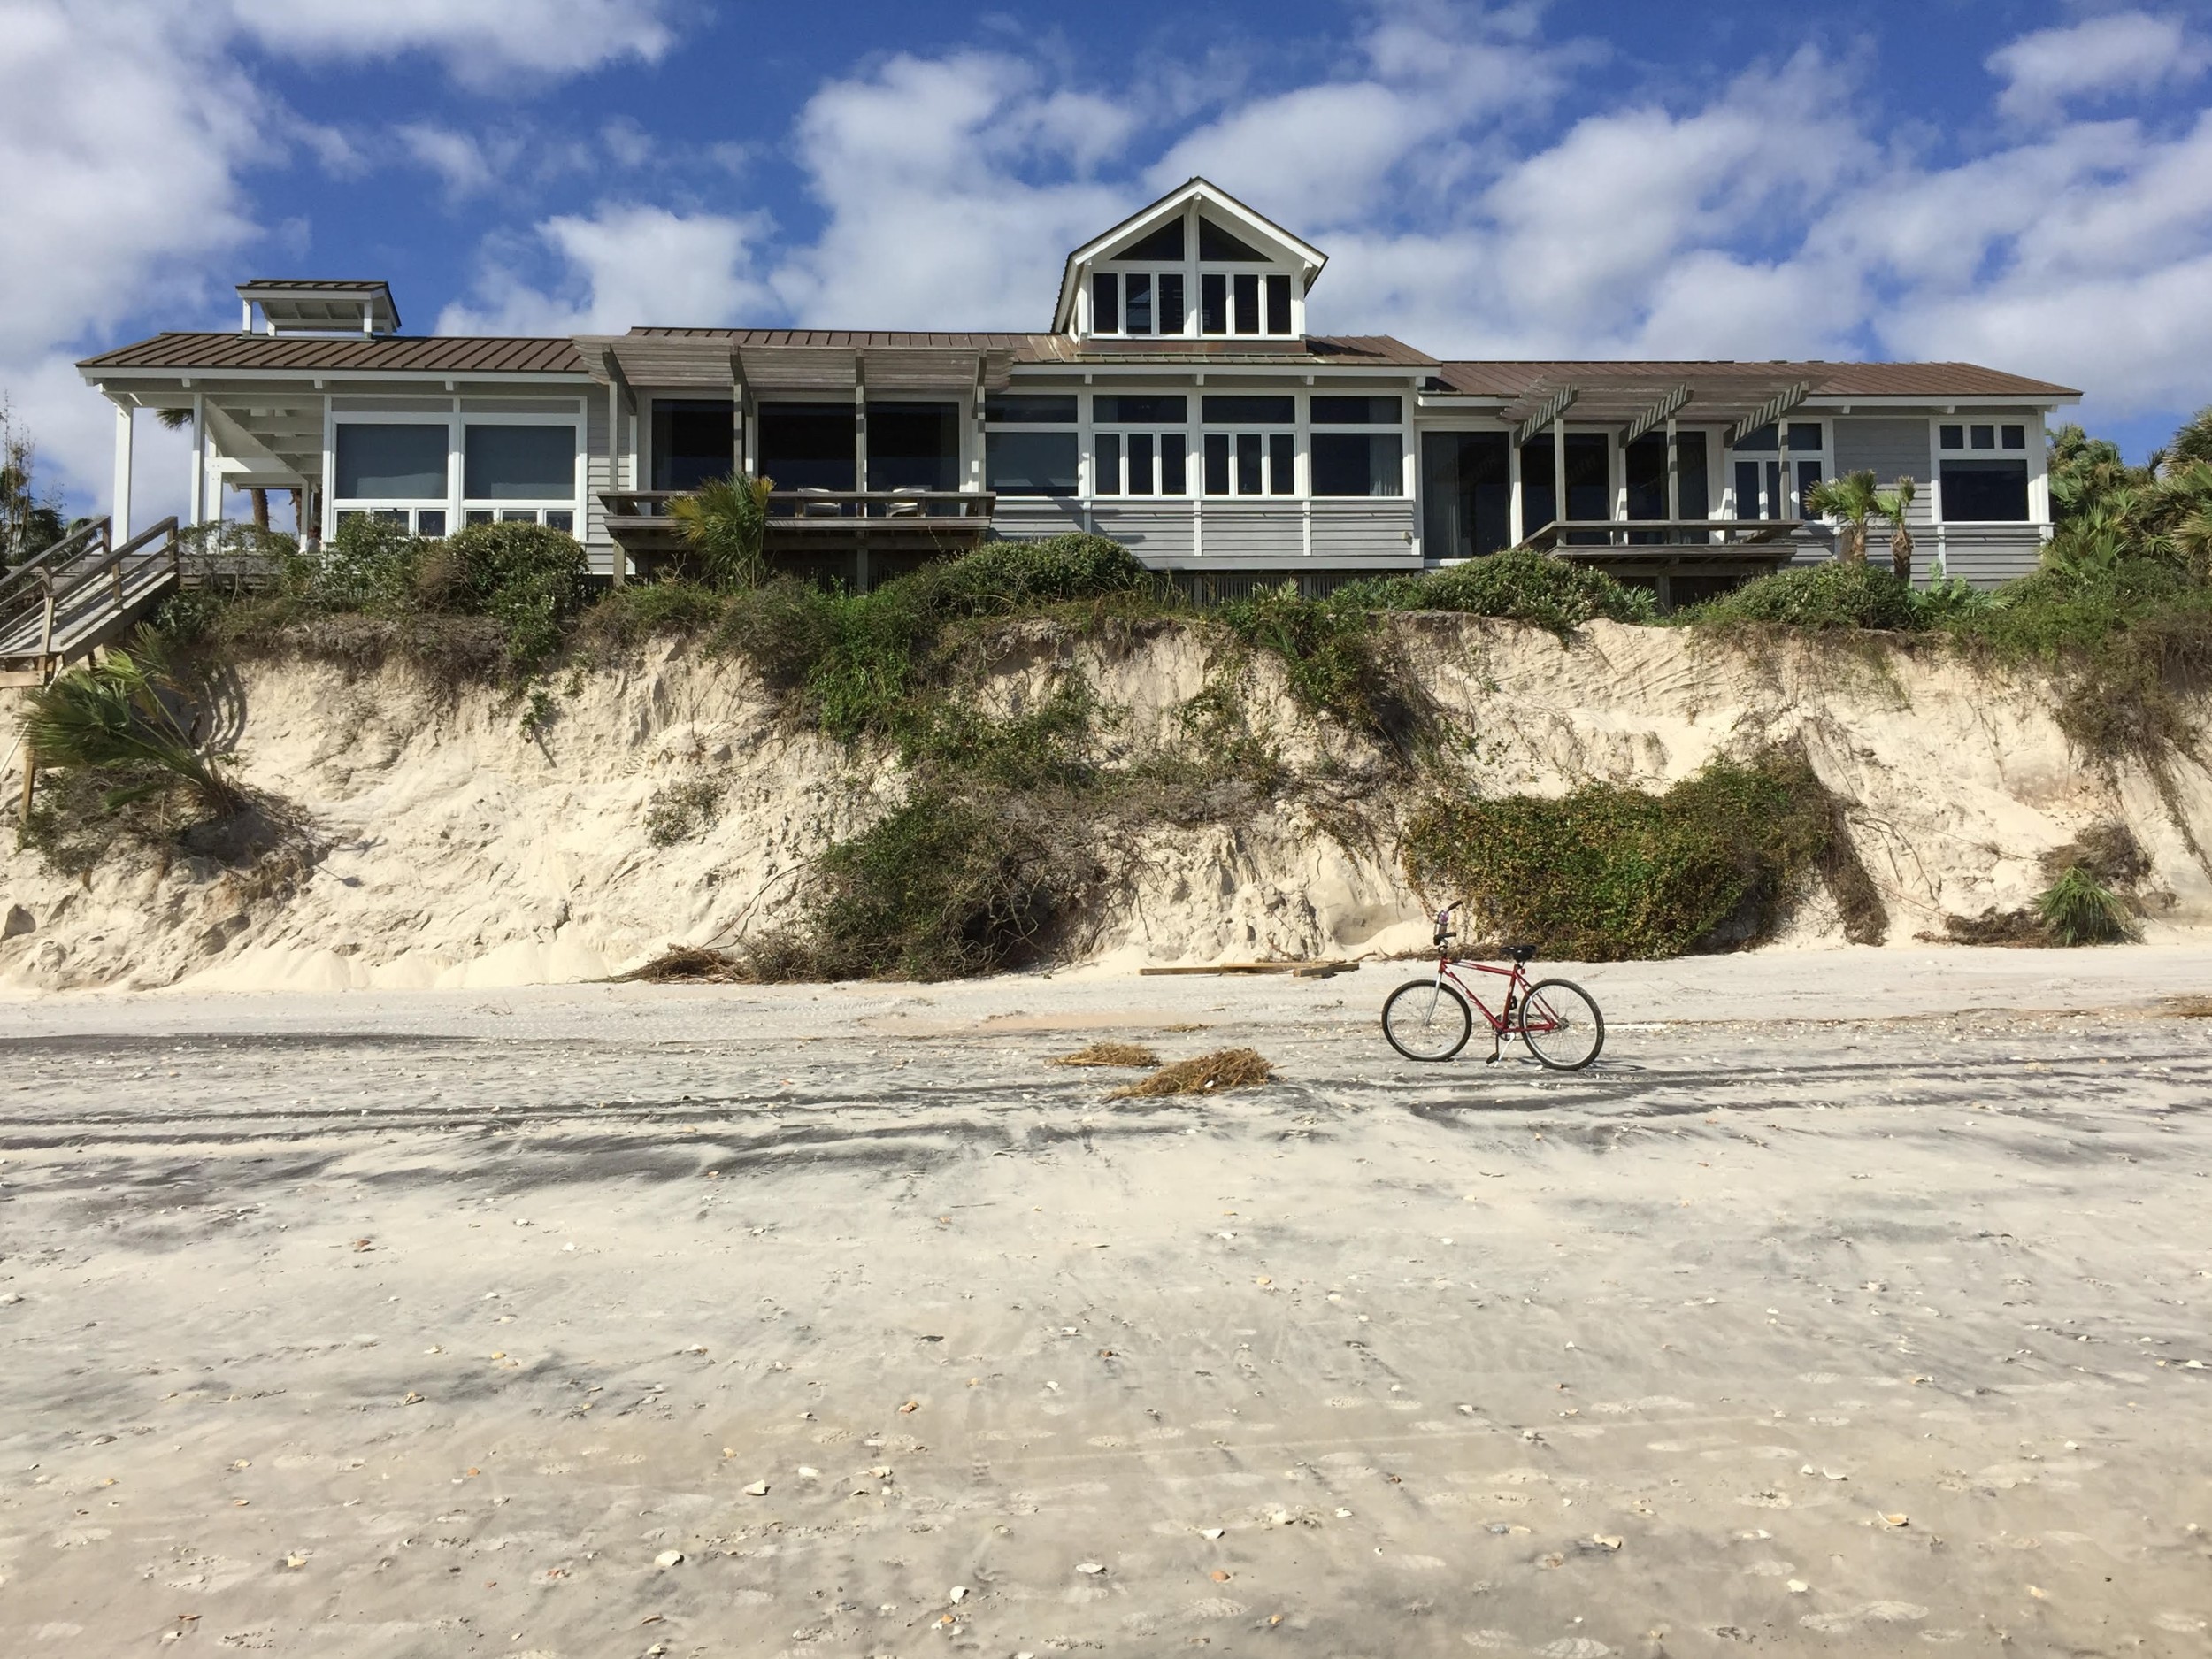 A home on Ponte Vedra Boulevard has lost 40-50 feet of its dunes due to Hurricane Matthew.